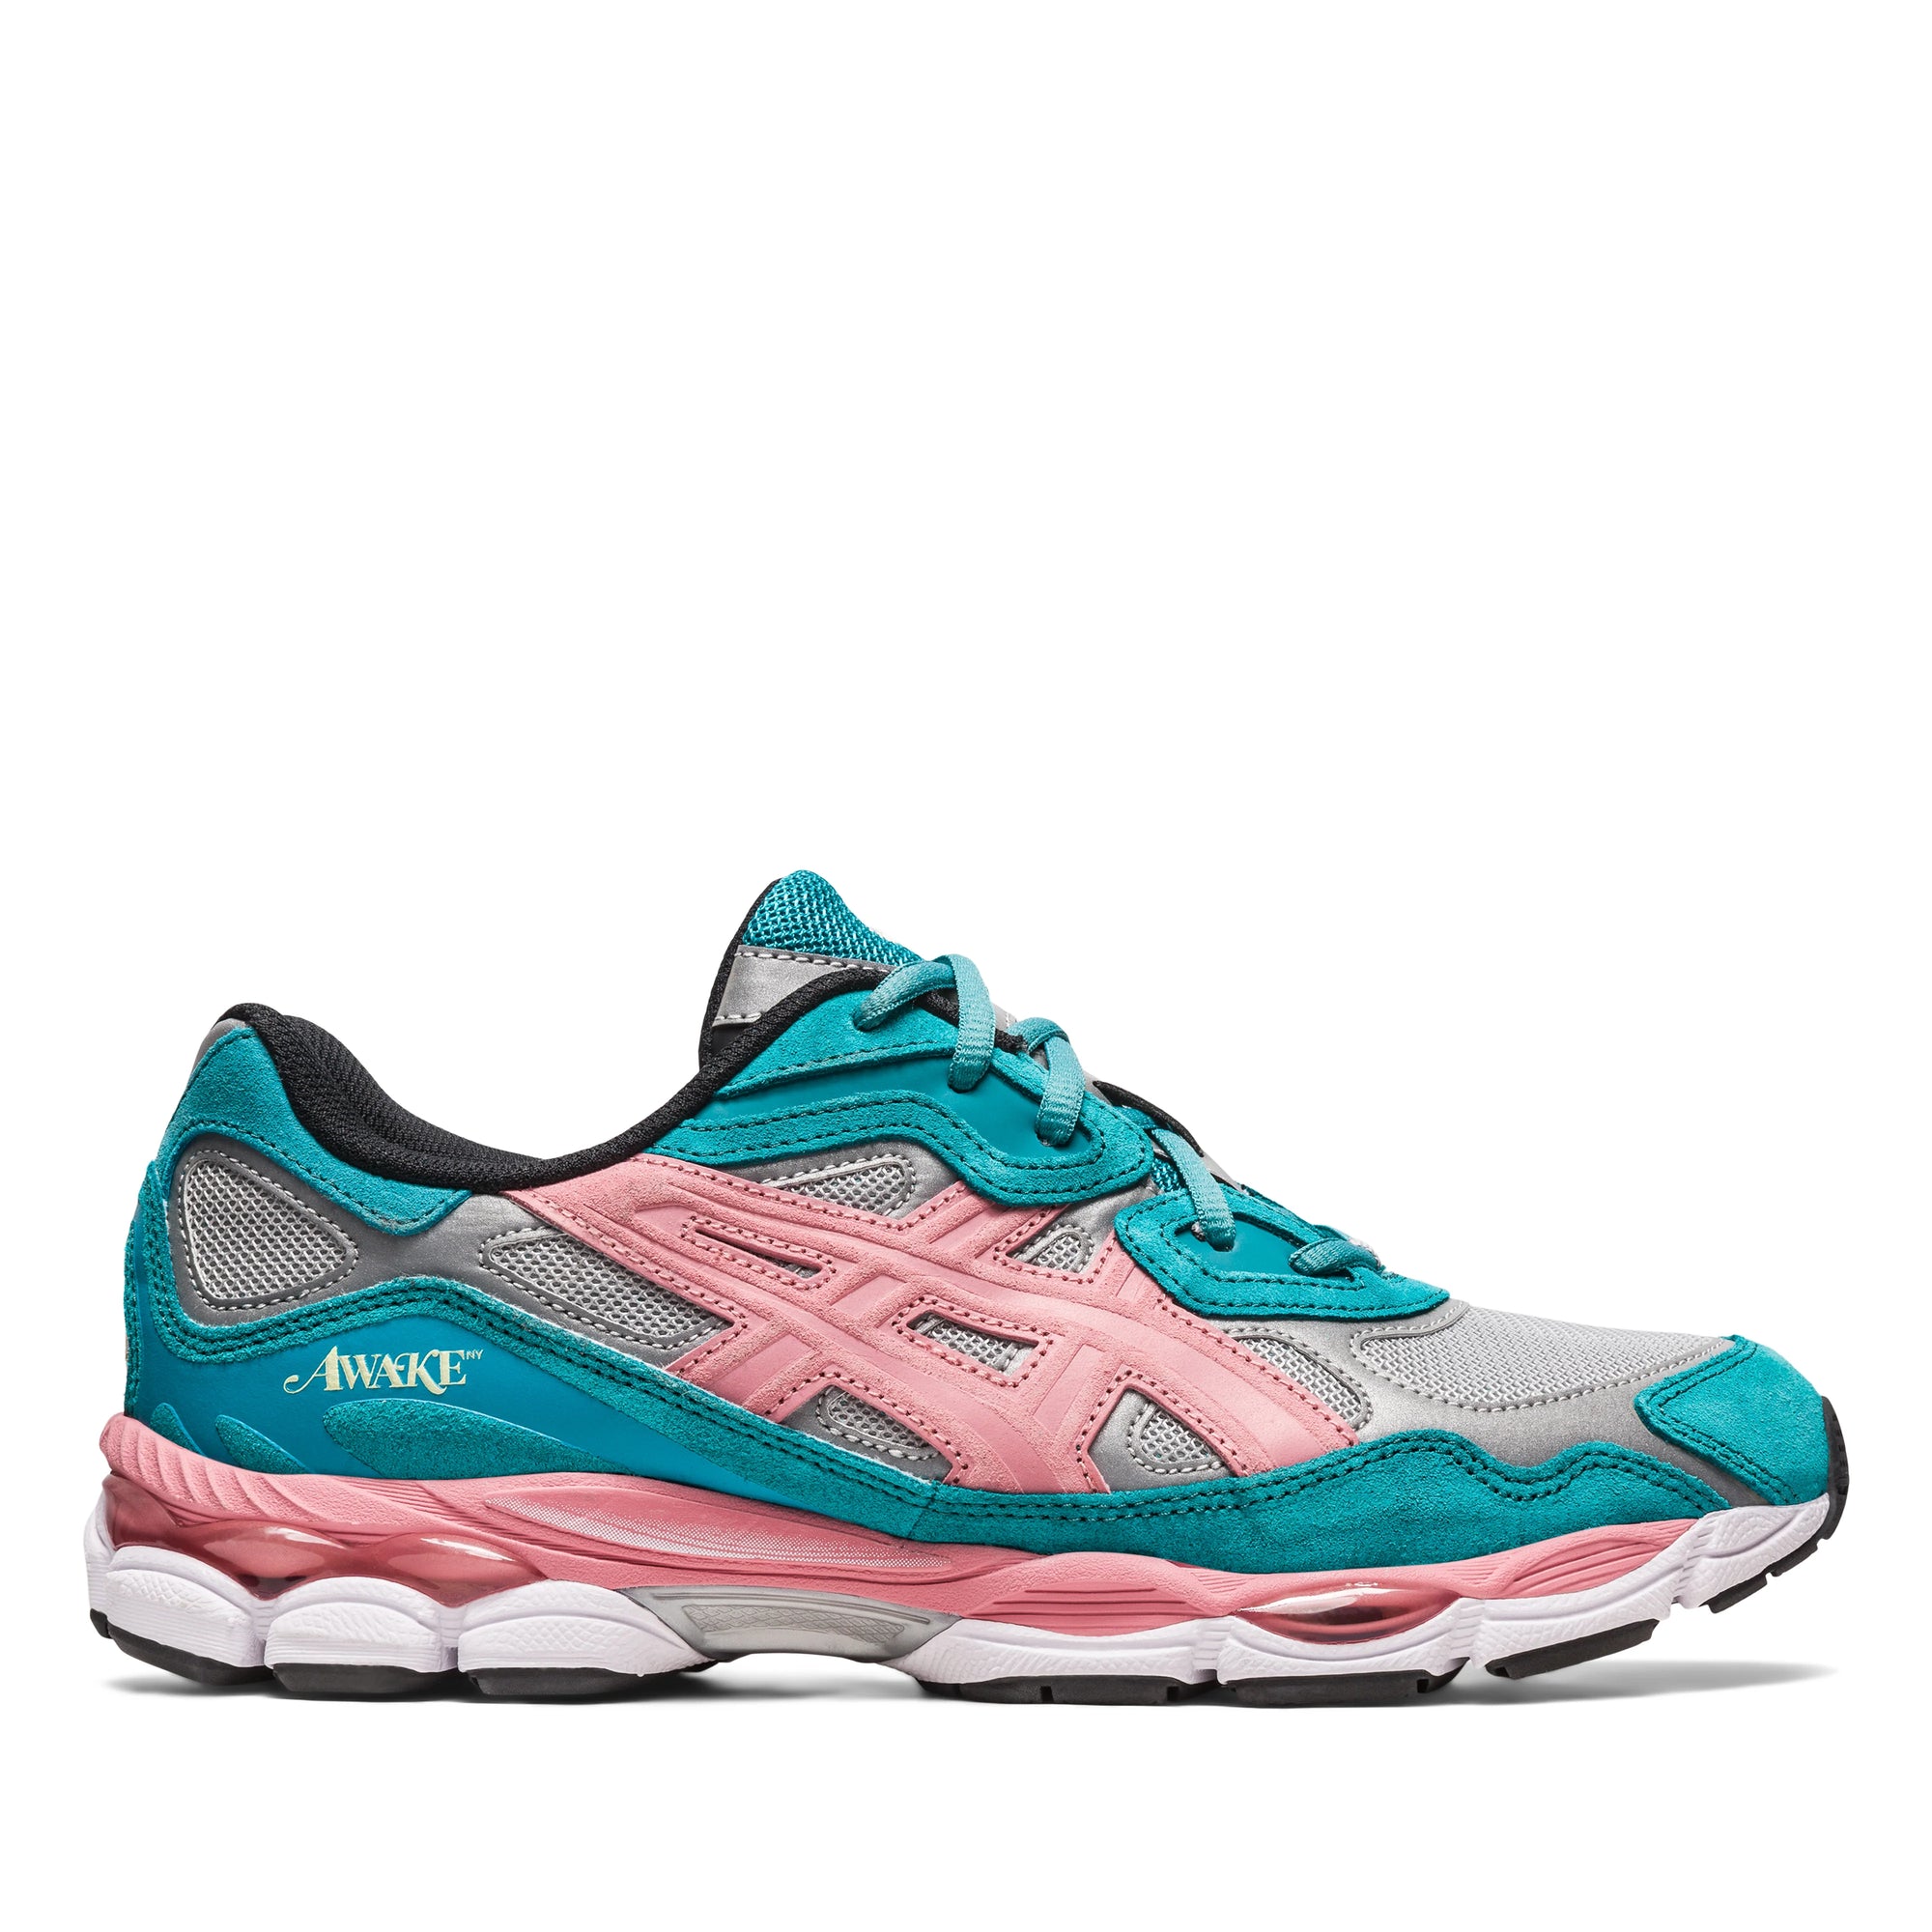 ASICS - GEL-NYC - (Pure Silver/Green Blue Slate) view 1